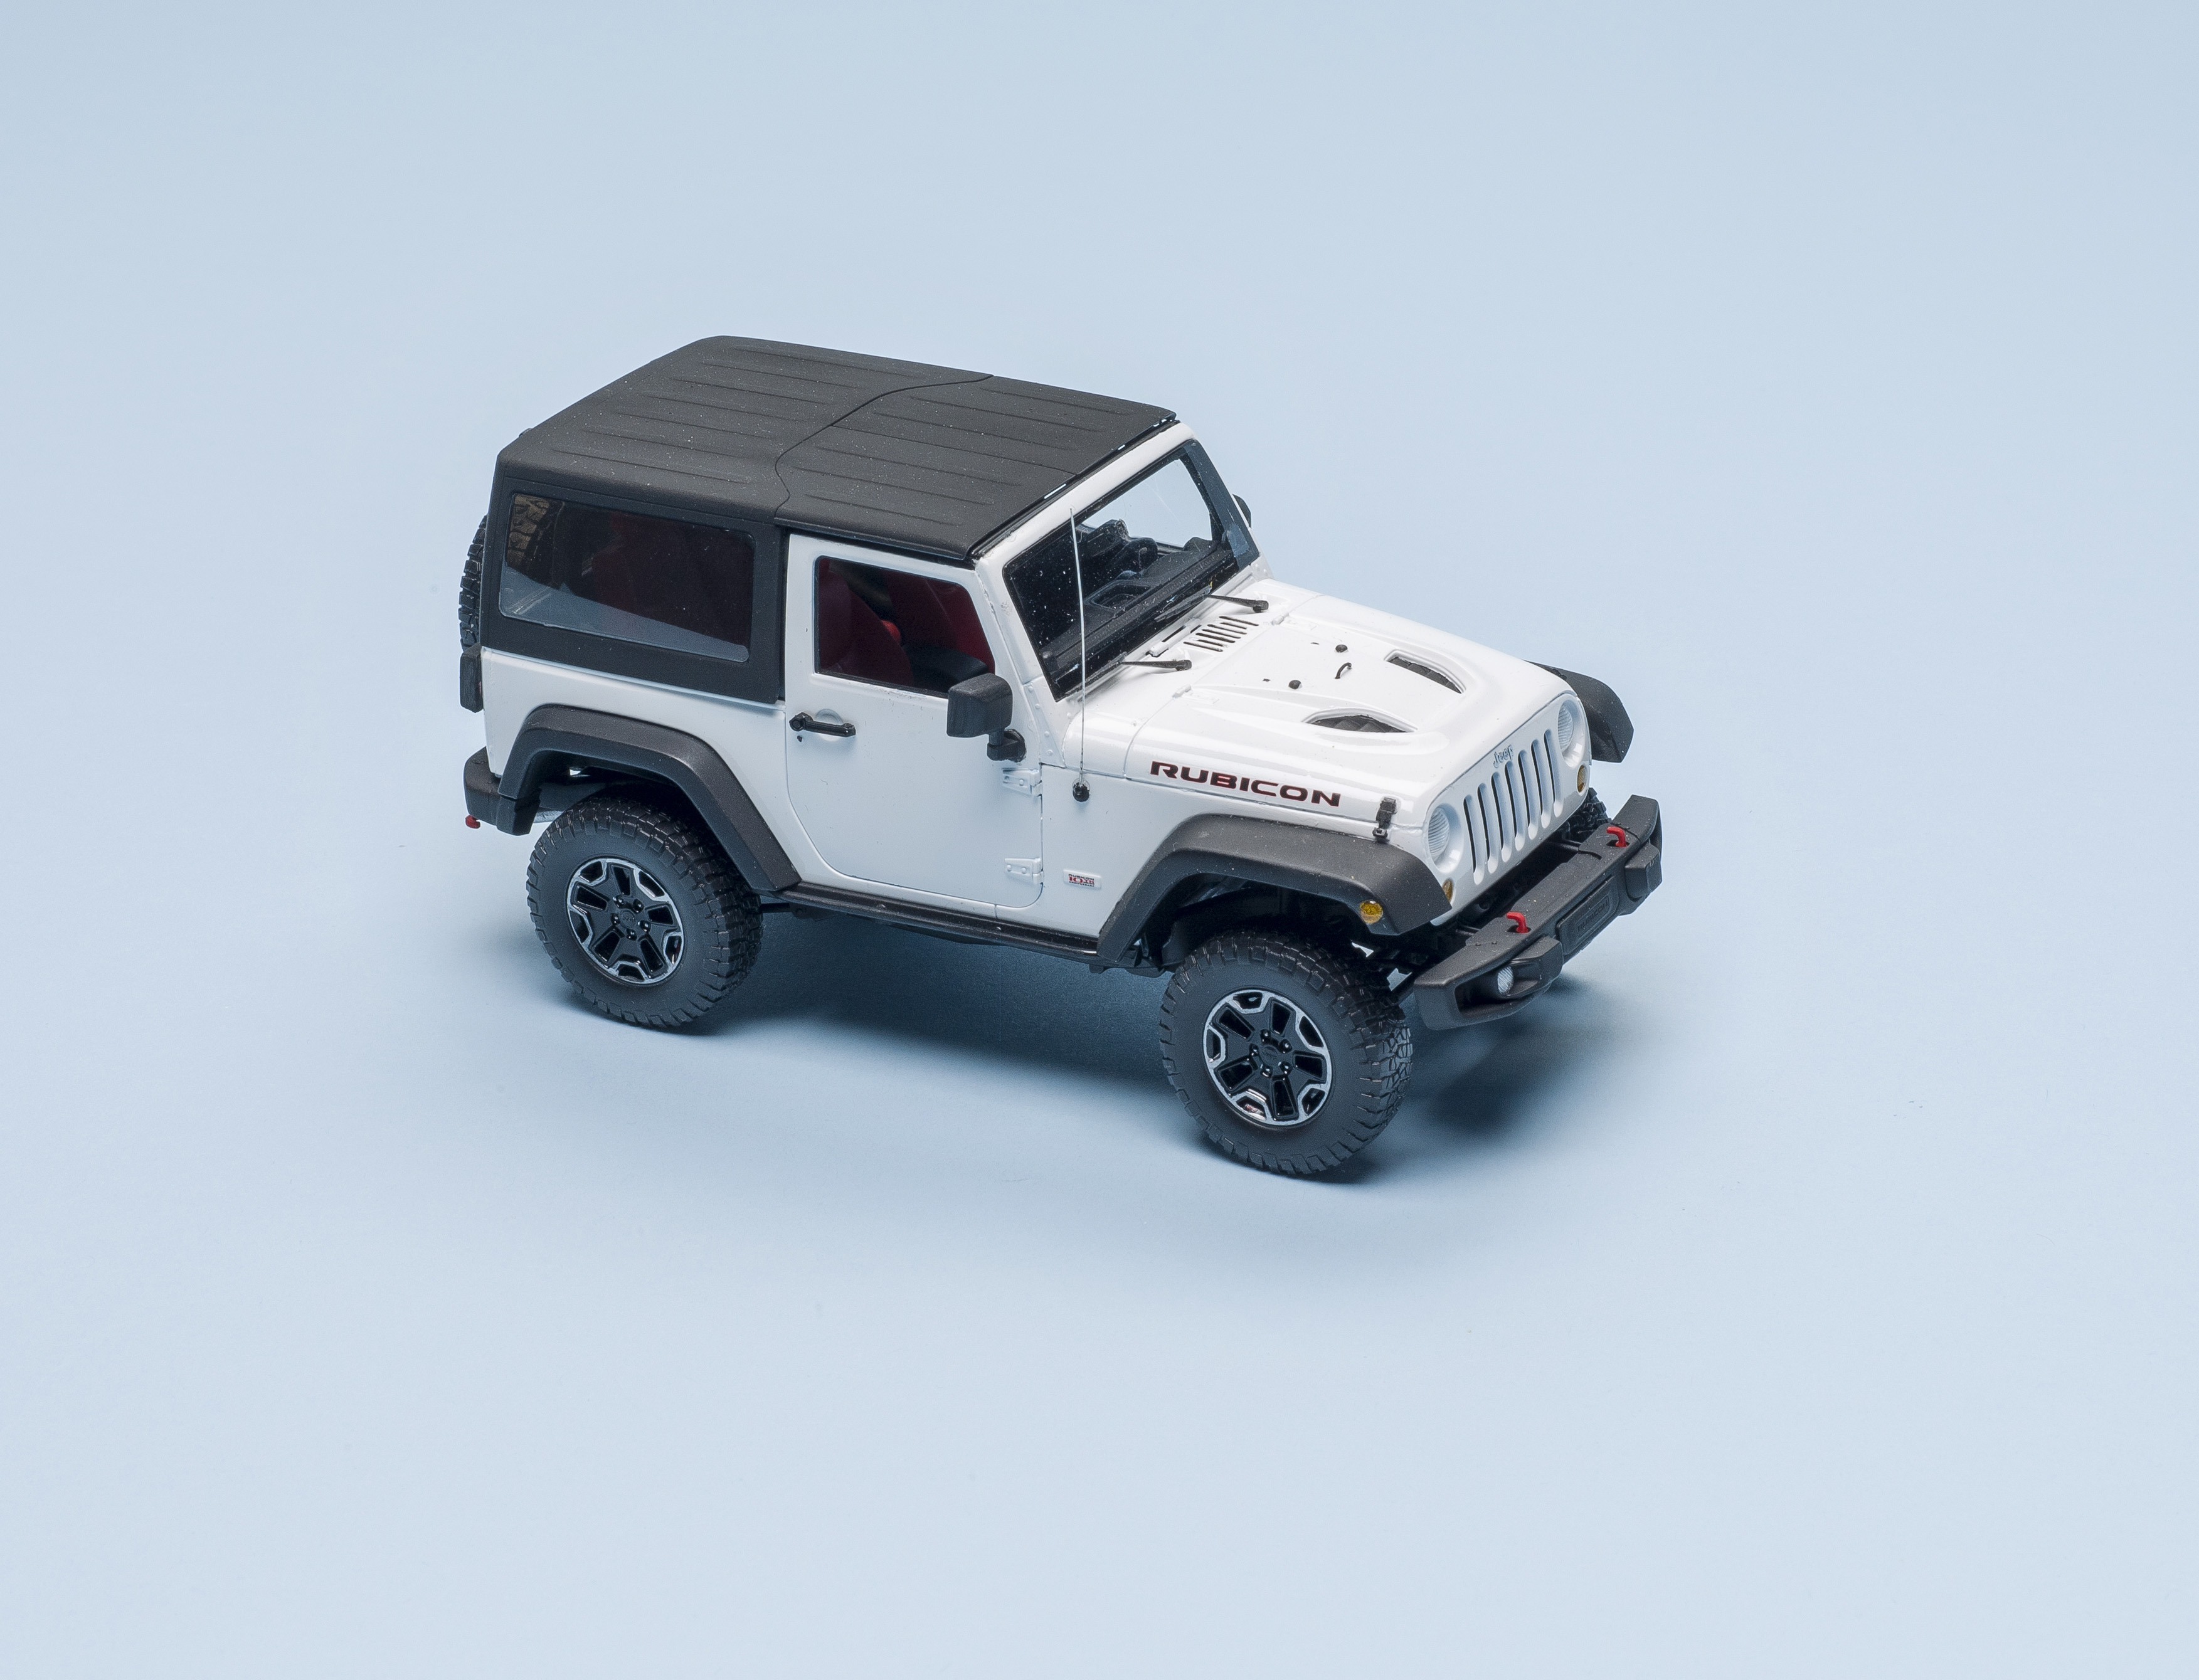 Resin Meng 1/24 Jeep Rubicon Upgrade Set # SPS-054 